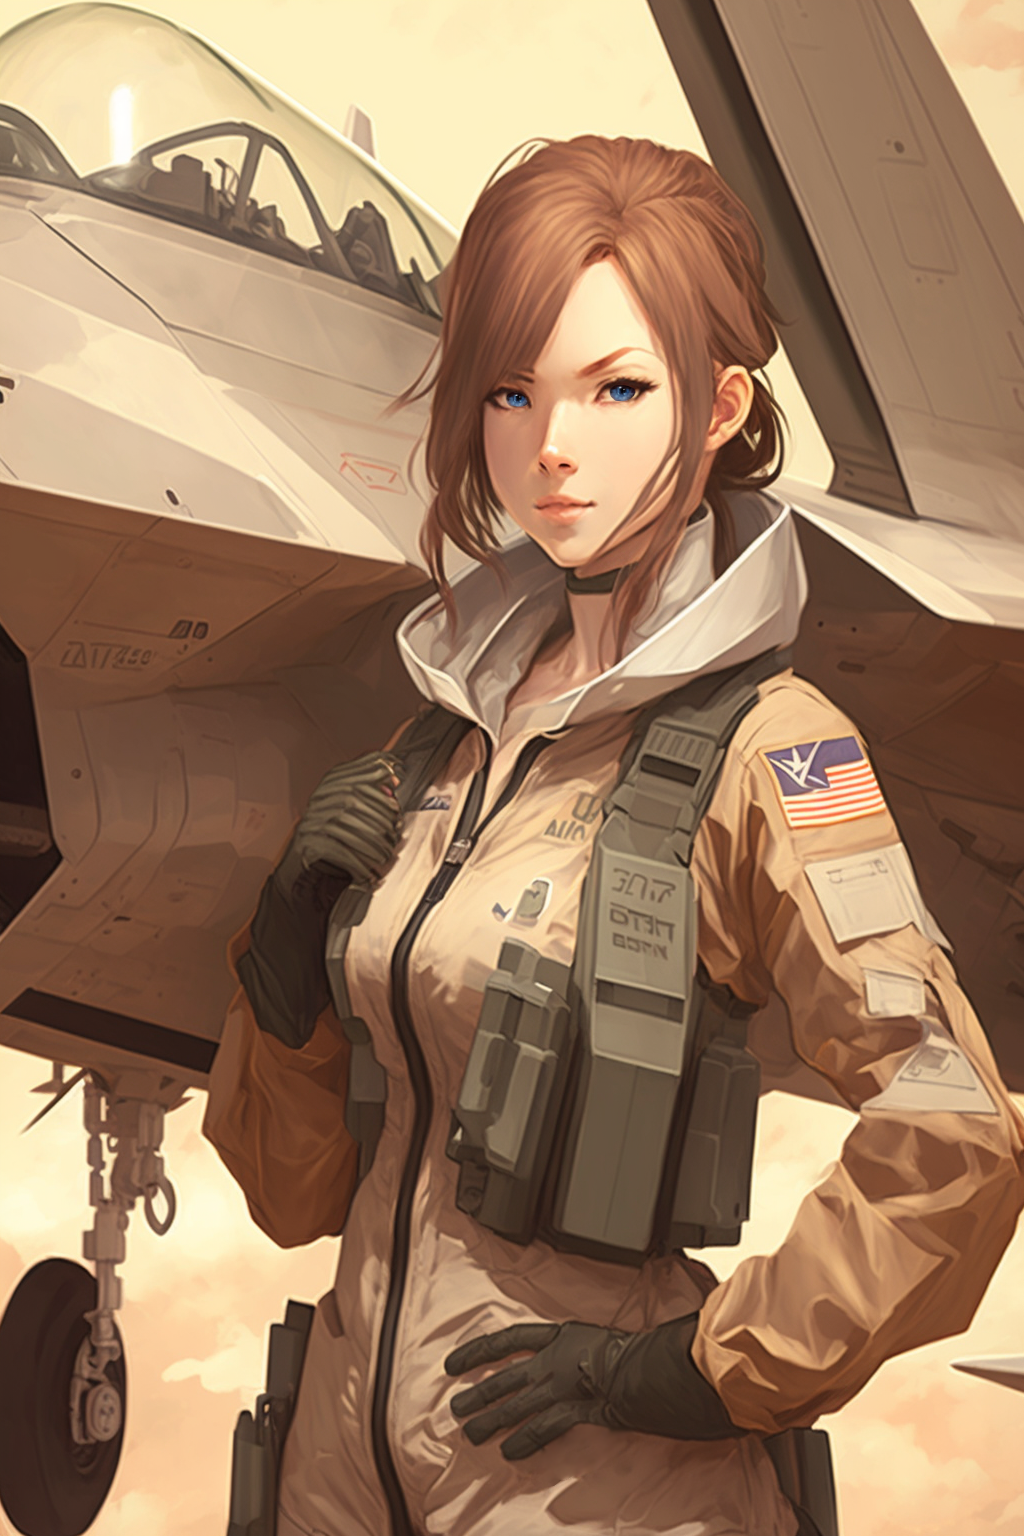 Anime Fighter Pilot Raptor Girl by AbstractIntuitions on DeviantArt